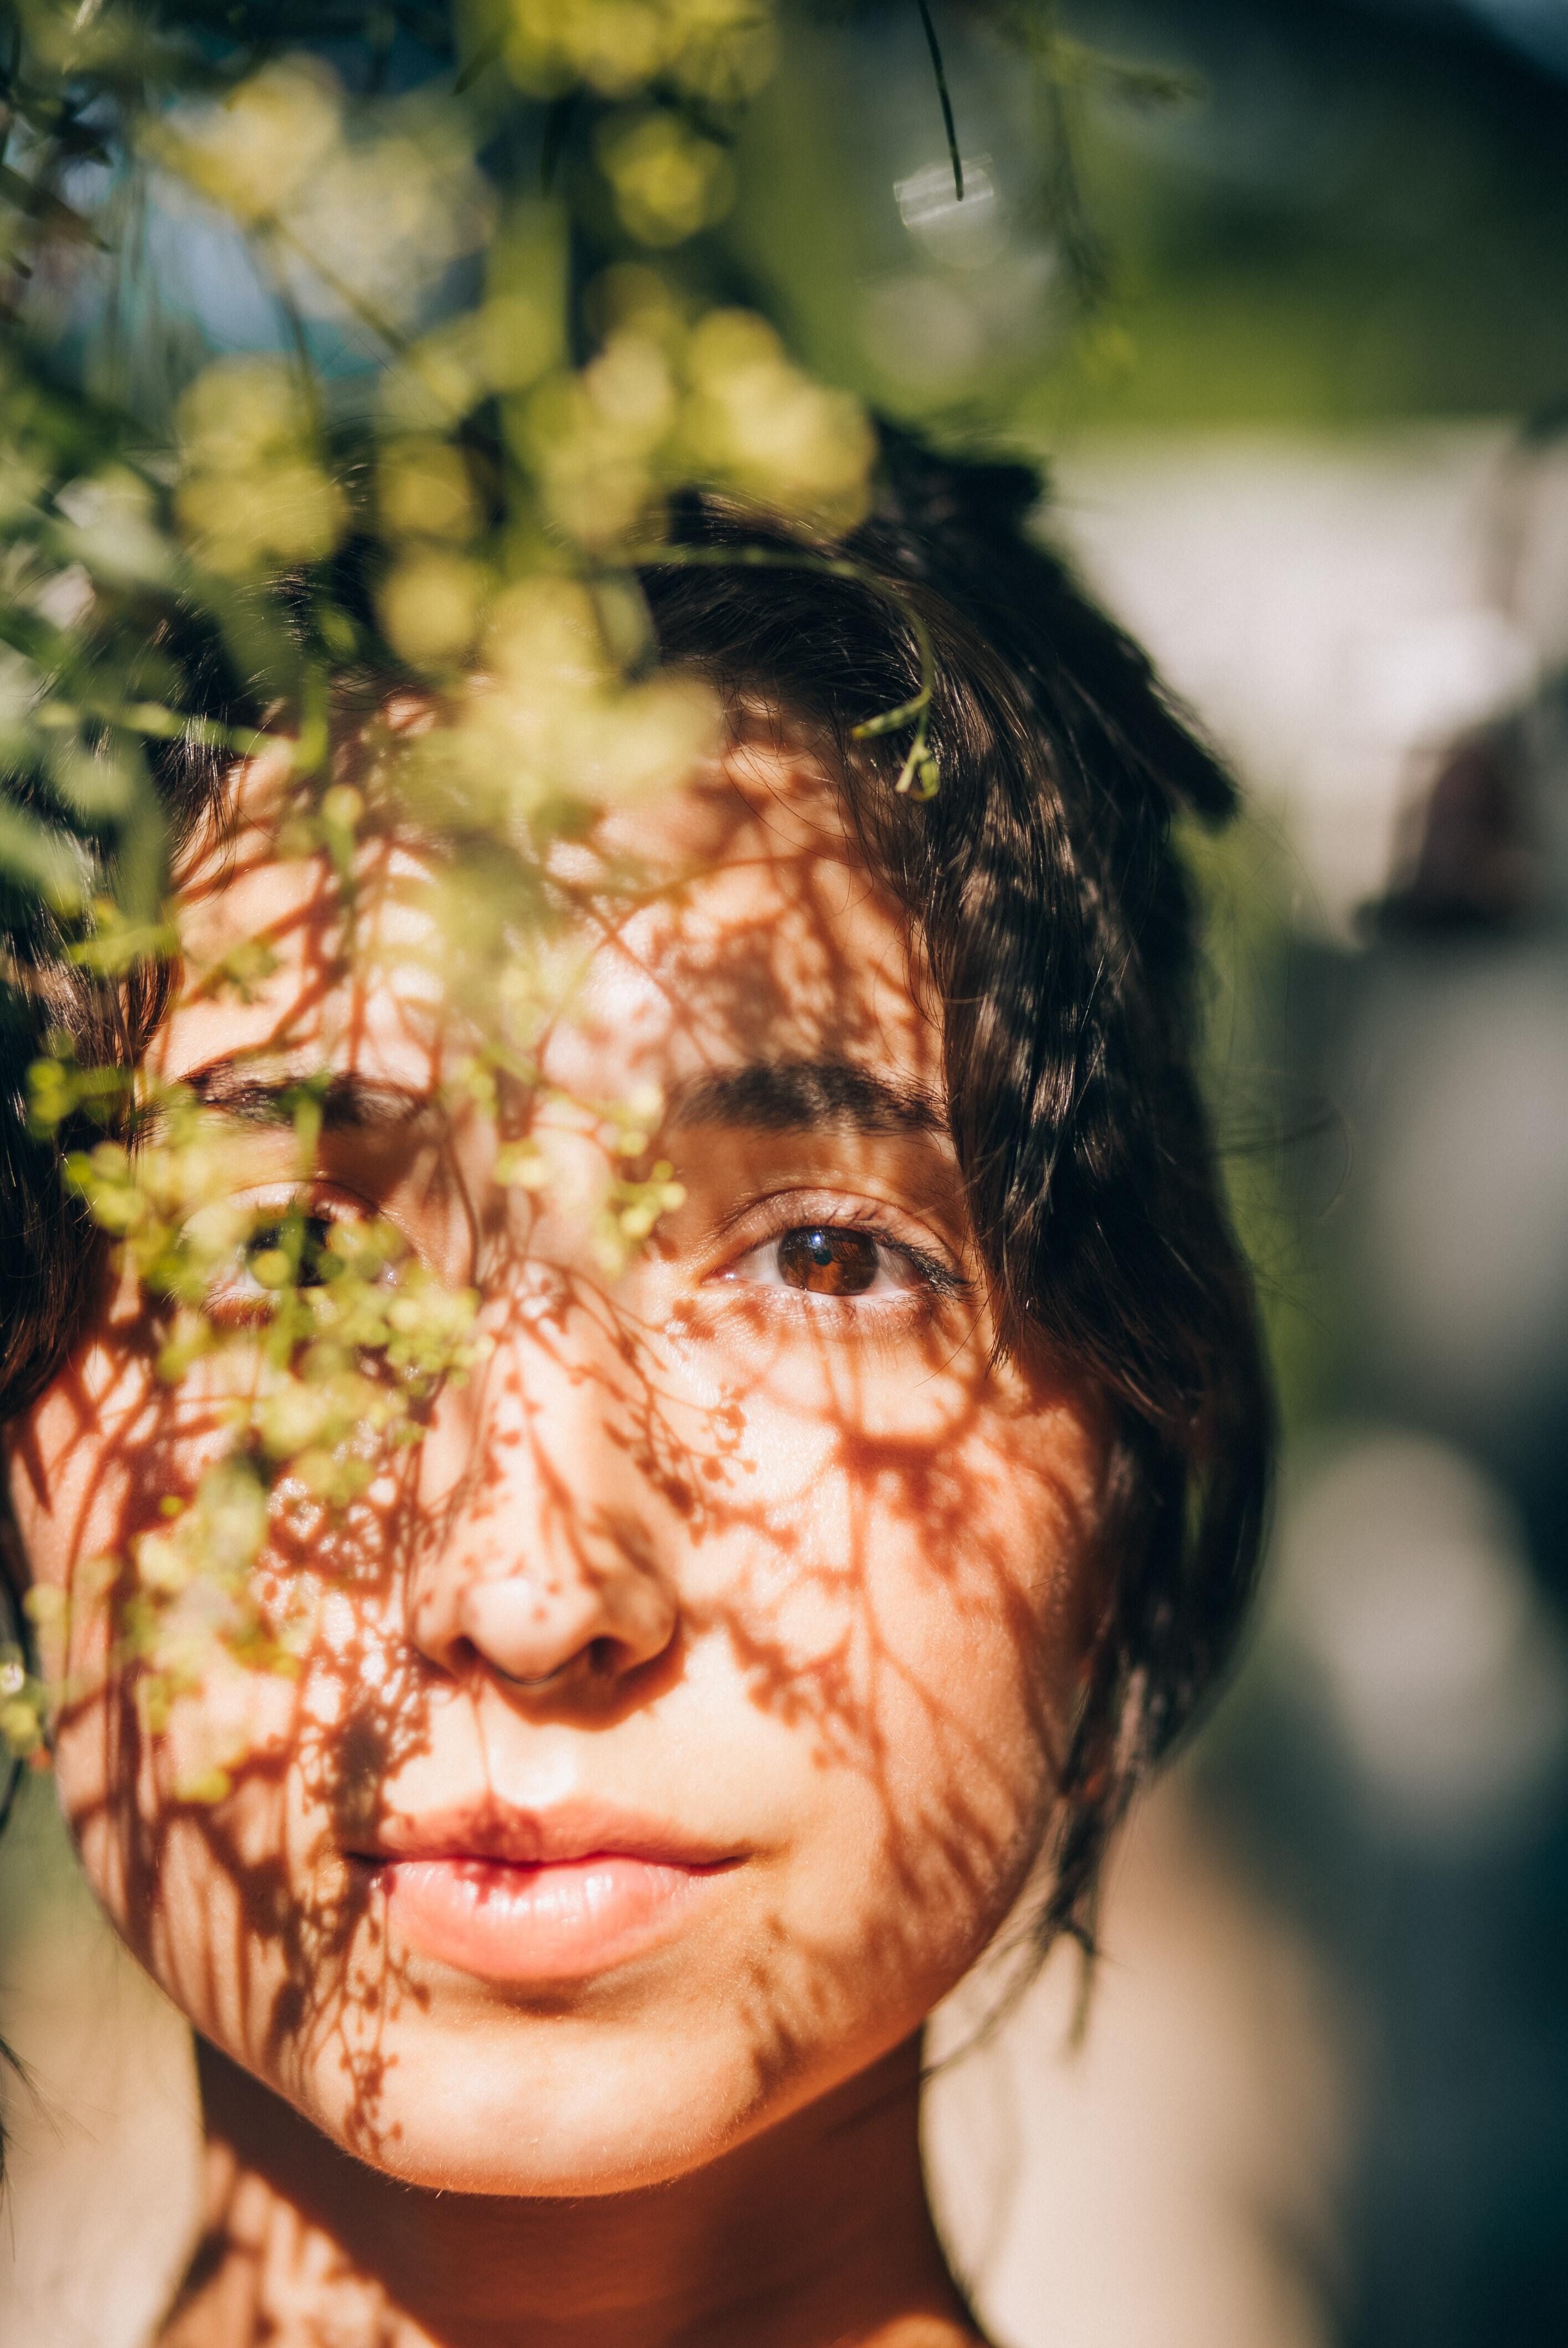 image of shadows of leaves cast on woman's face